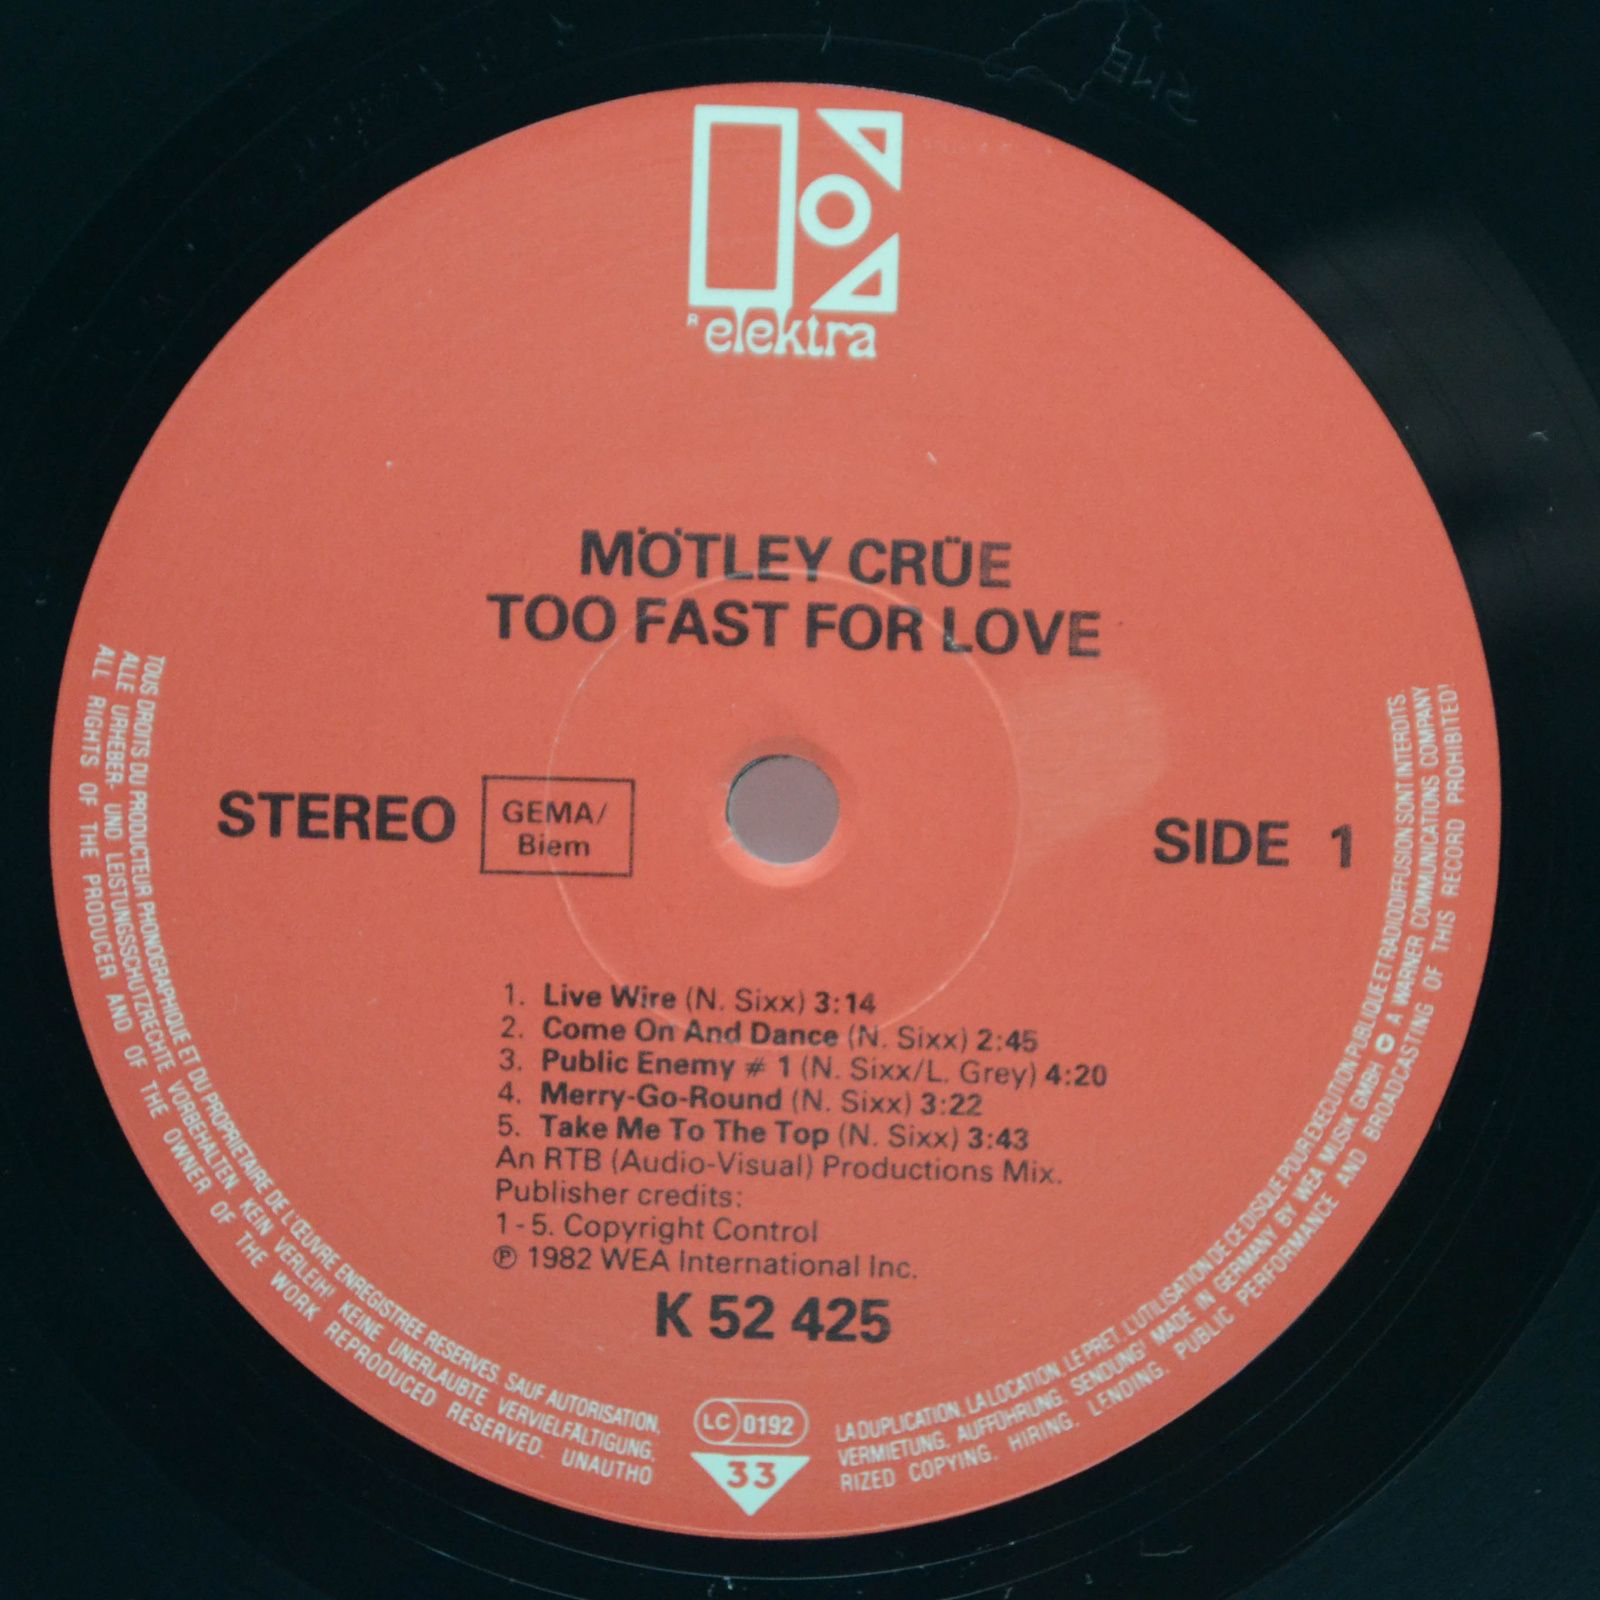 Mötley Crüe — Too Fast For Love, 1984